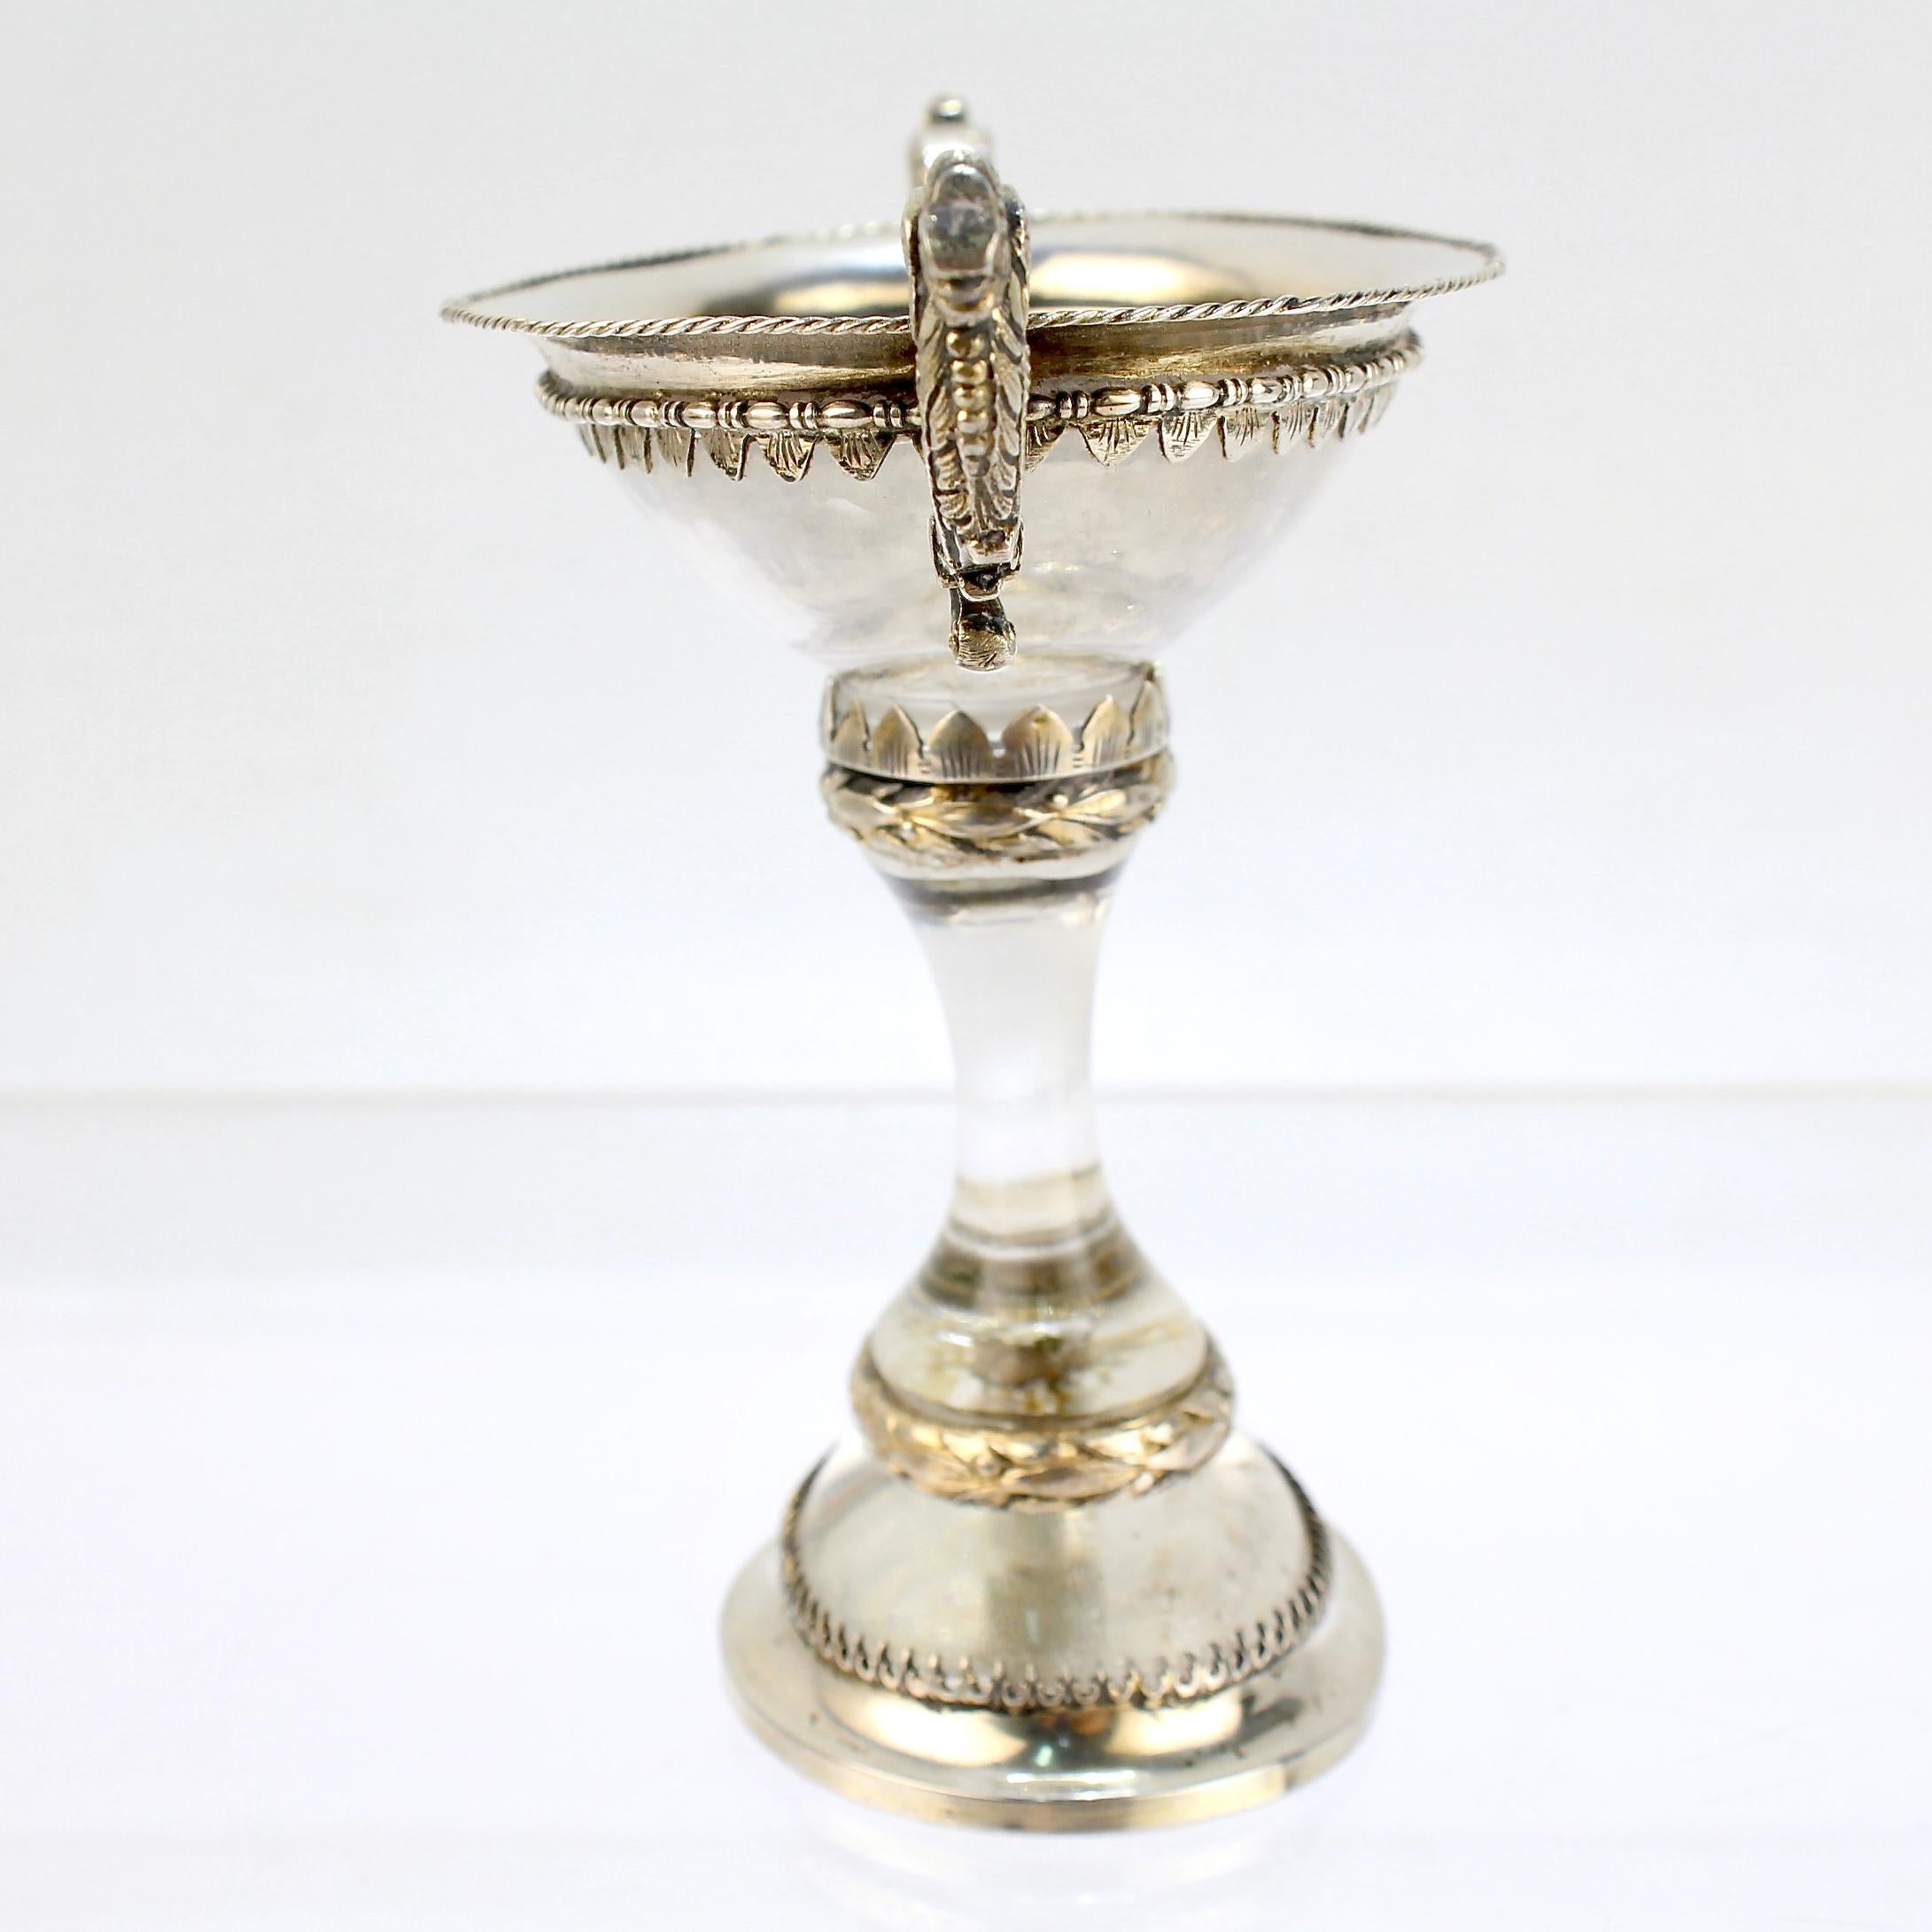 Rococo Antique 18th or 19th Century Austrian Silver Mounted Rock Crystal Salt Cellar For Sale